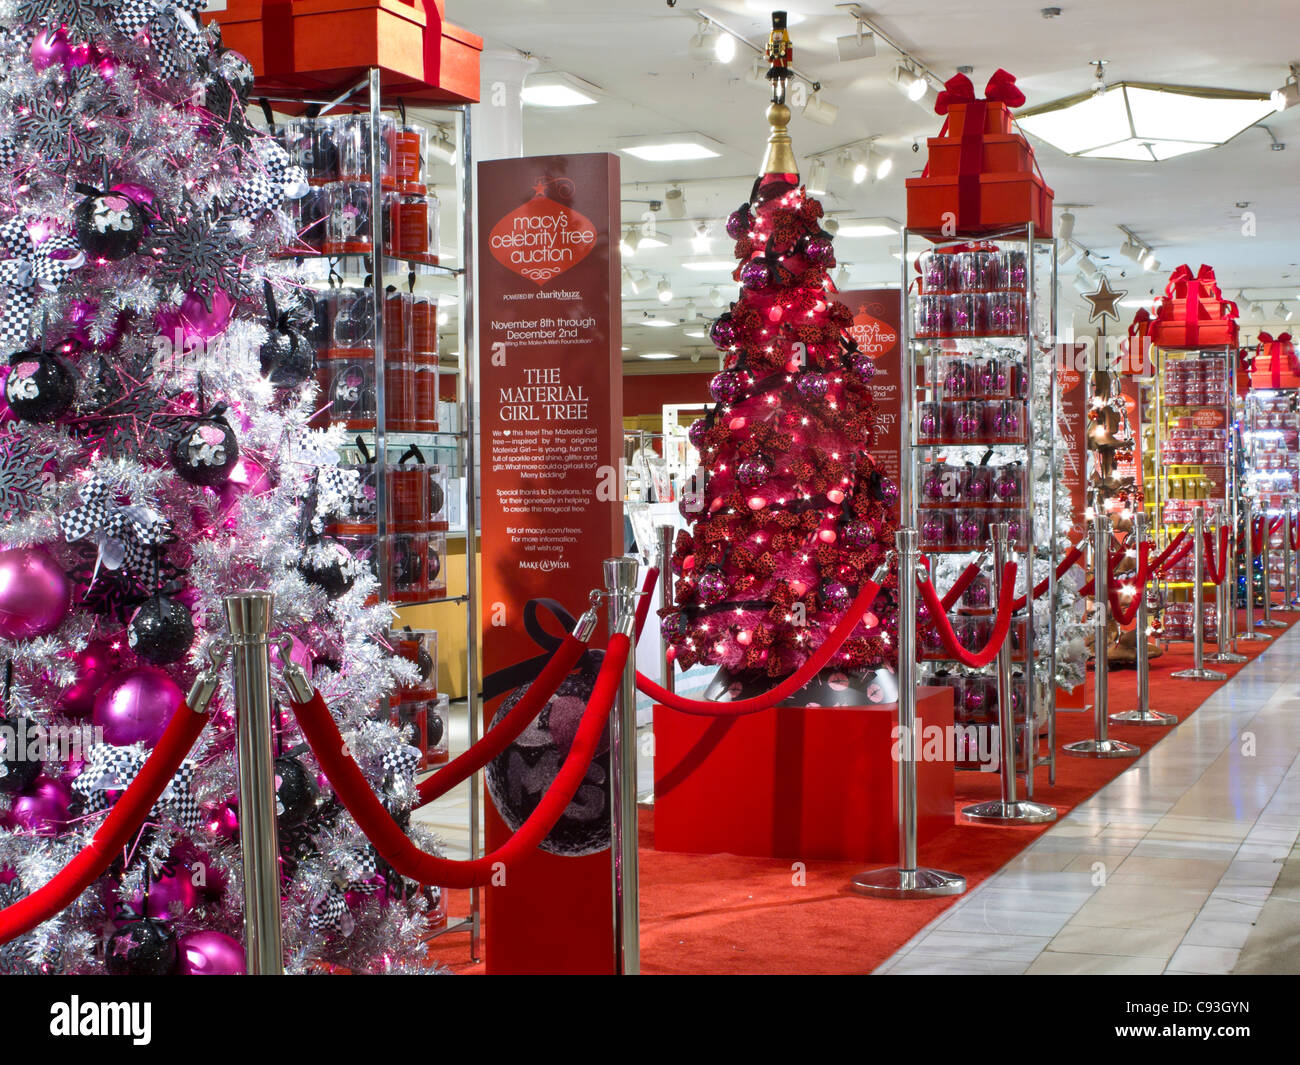 Macy&#39;s Department Store, Christmas Displays, NYC Stock Photo, Royalty Free Image: 40031817 - Alamy